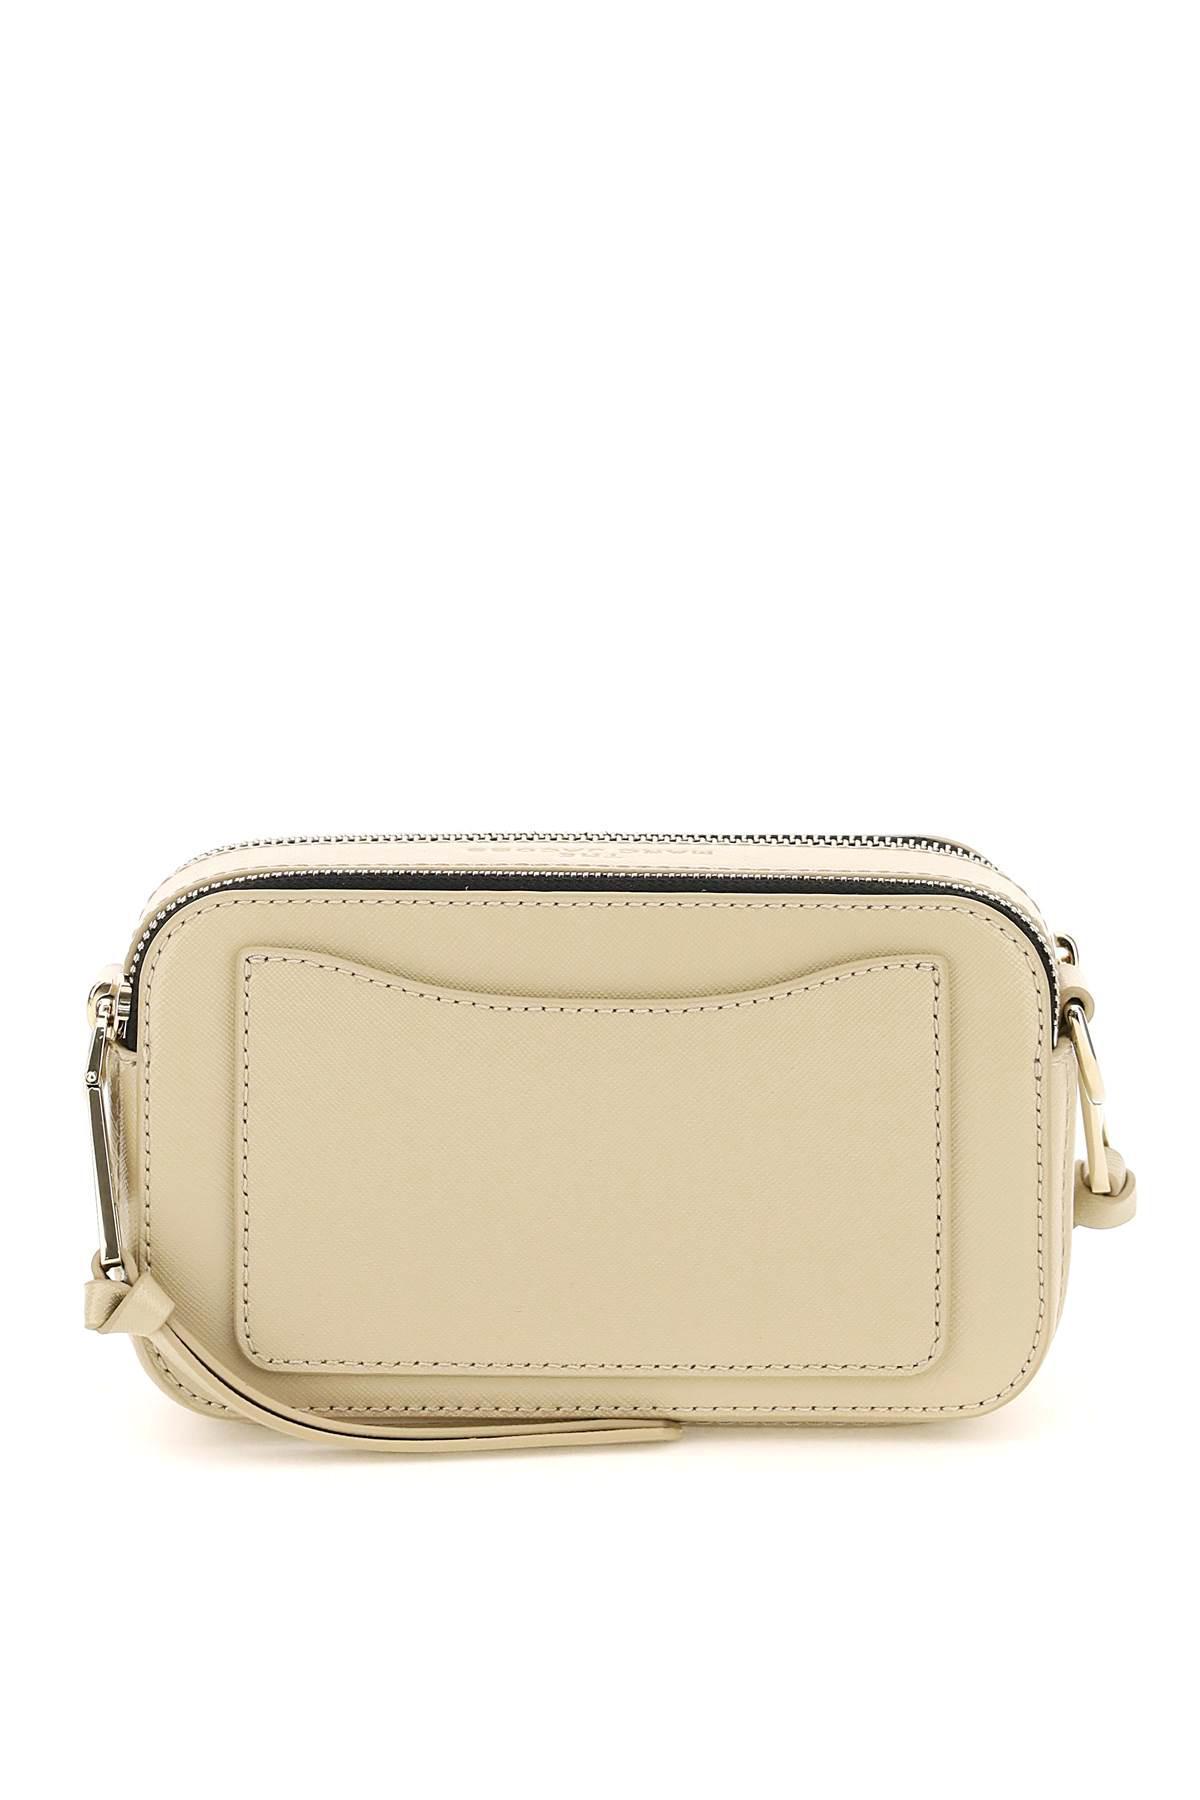 MARC JACOBS The Snapshot Small Camera Bag. #marcjacobs #bags #